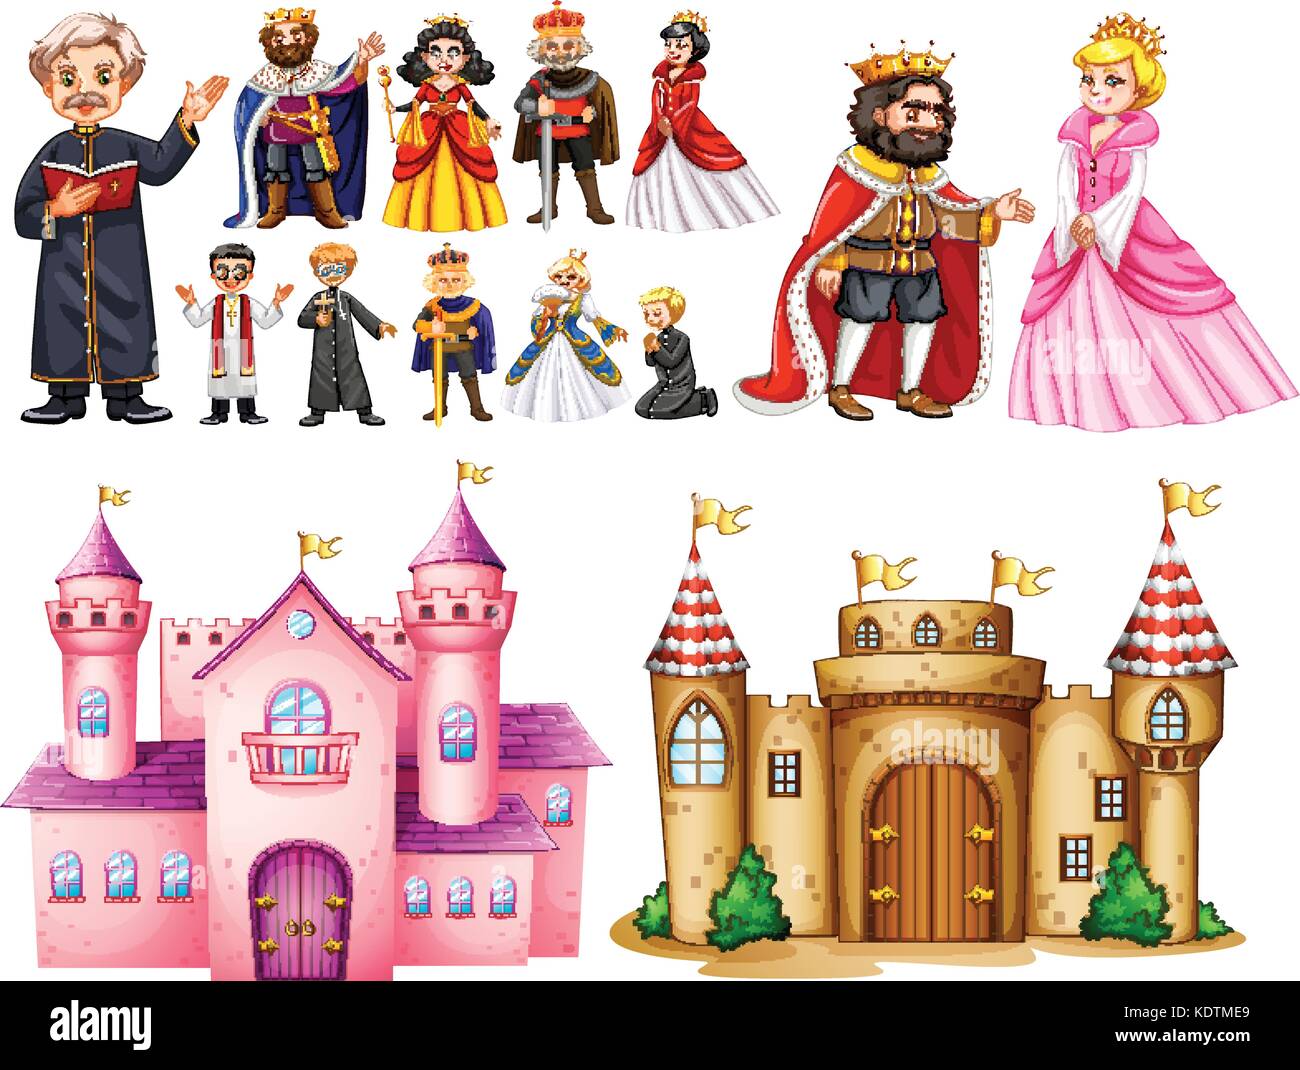 Royal palace and different characters illustration Stock Vector